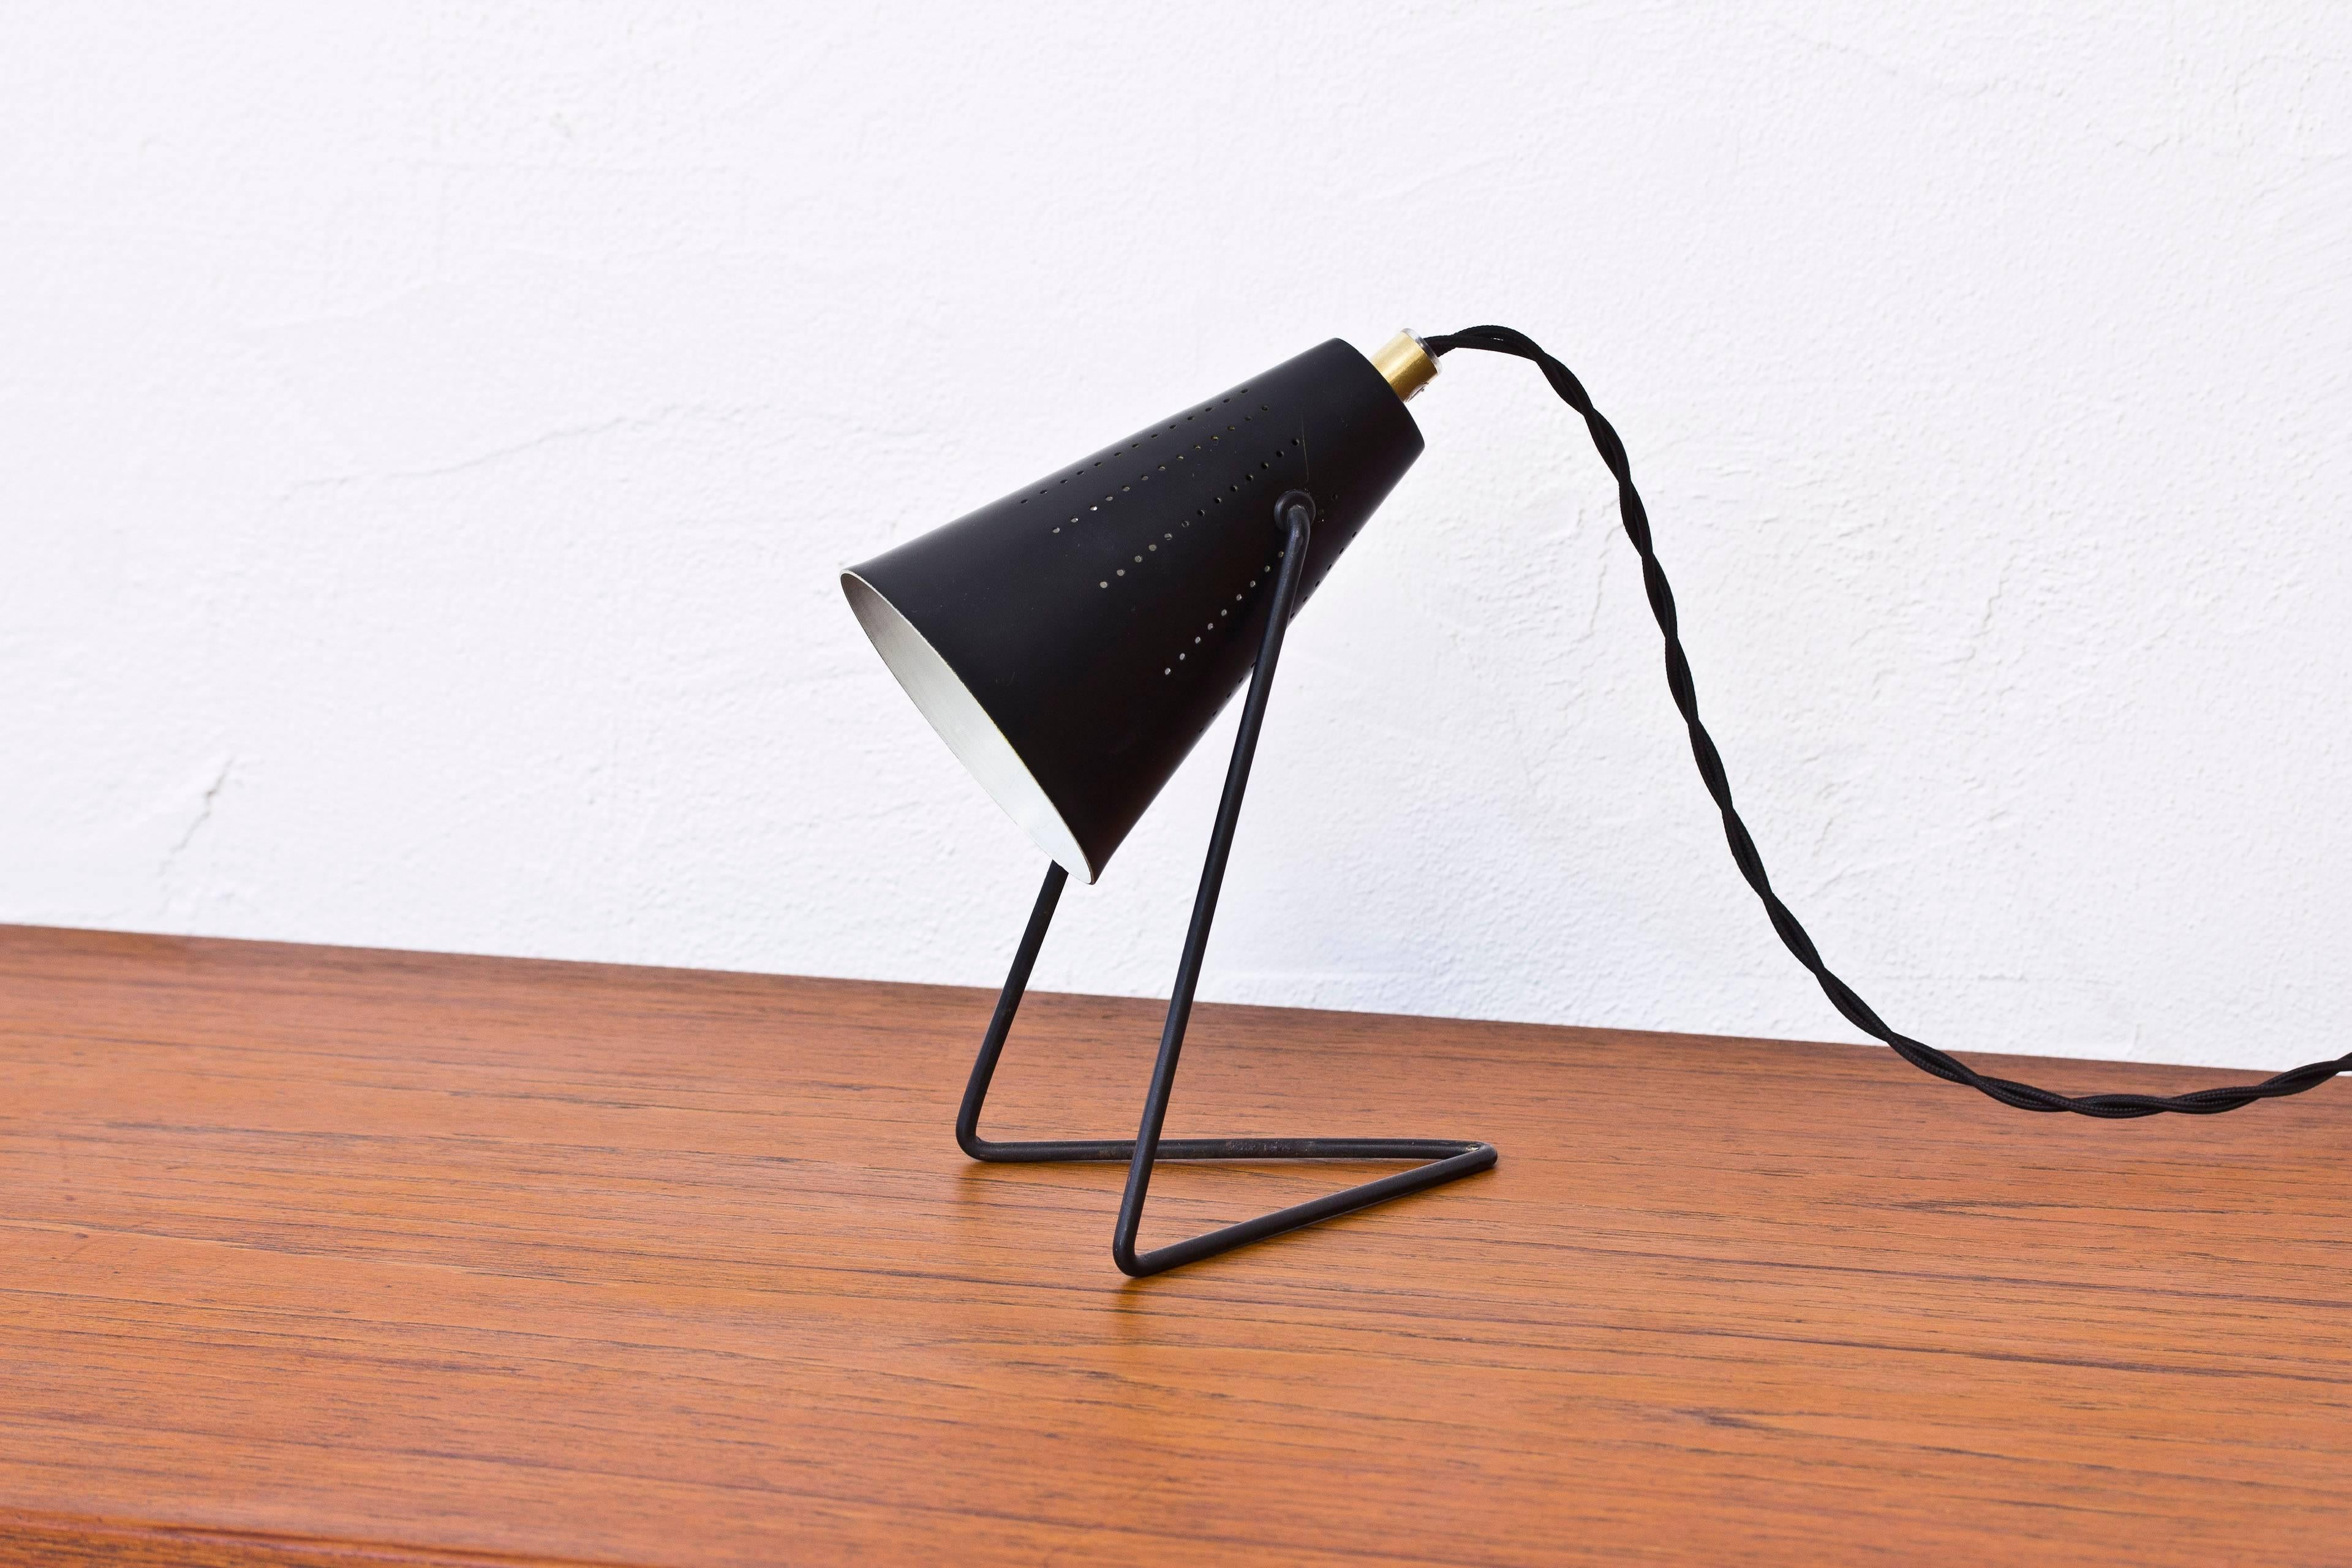 Table or wall lamp attributed to Sven Aage Holm Sørensen. Produced by ASEA in Sweden during the 1950s. Black lacquered with white lacquered inside with brass details. Very good condition with light wear and patina.